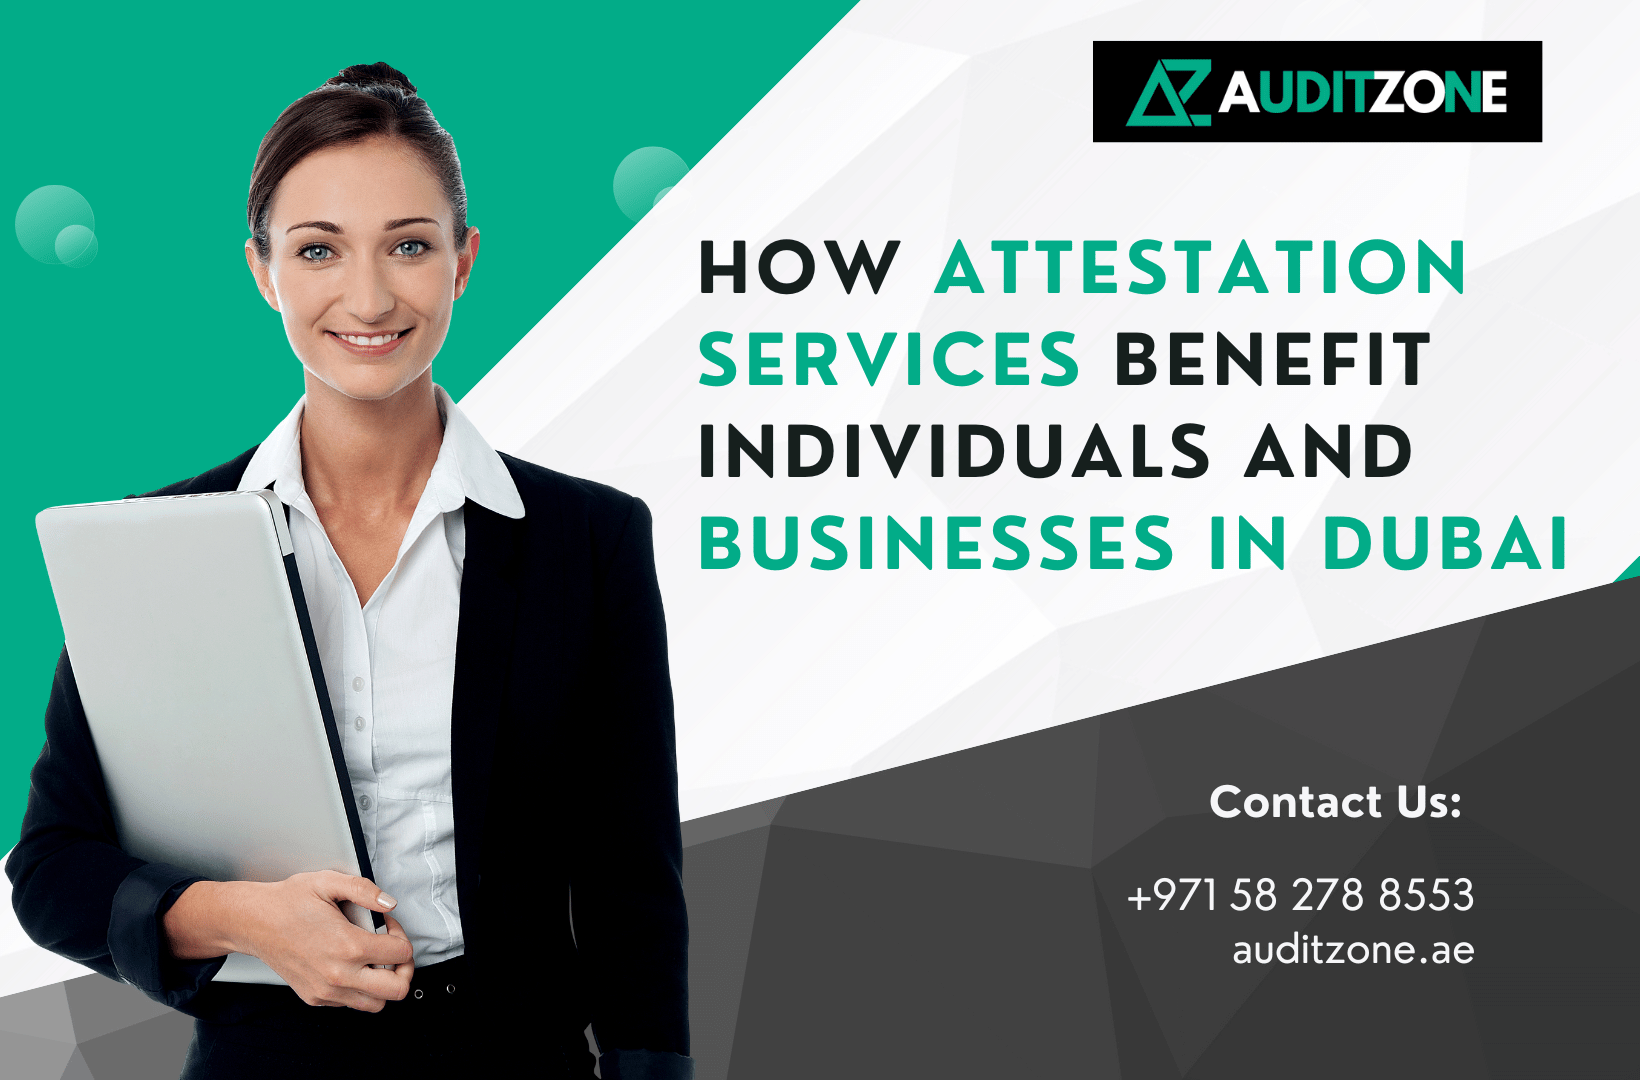 How Attestation Services Benefit Individuals and Businesses in Dubai